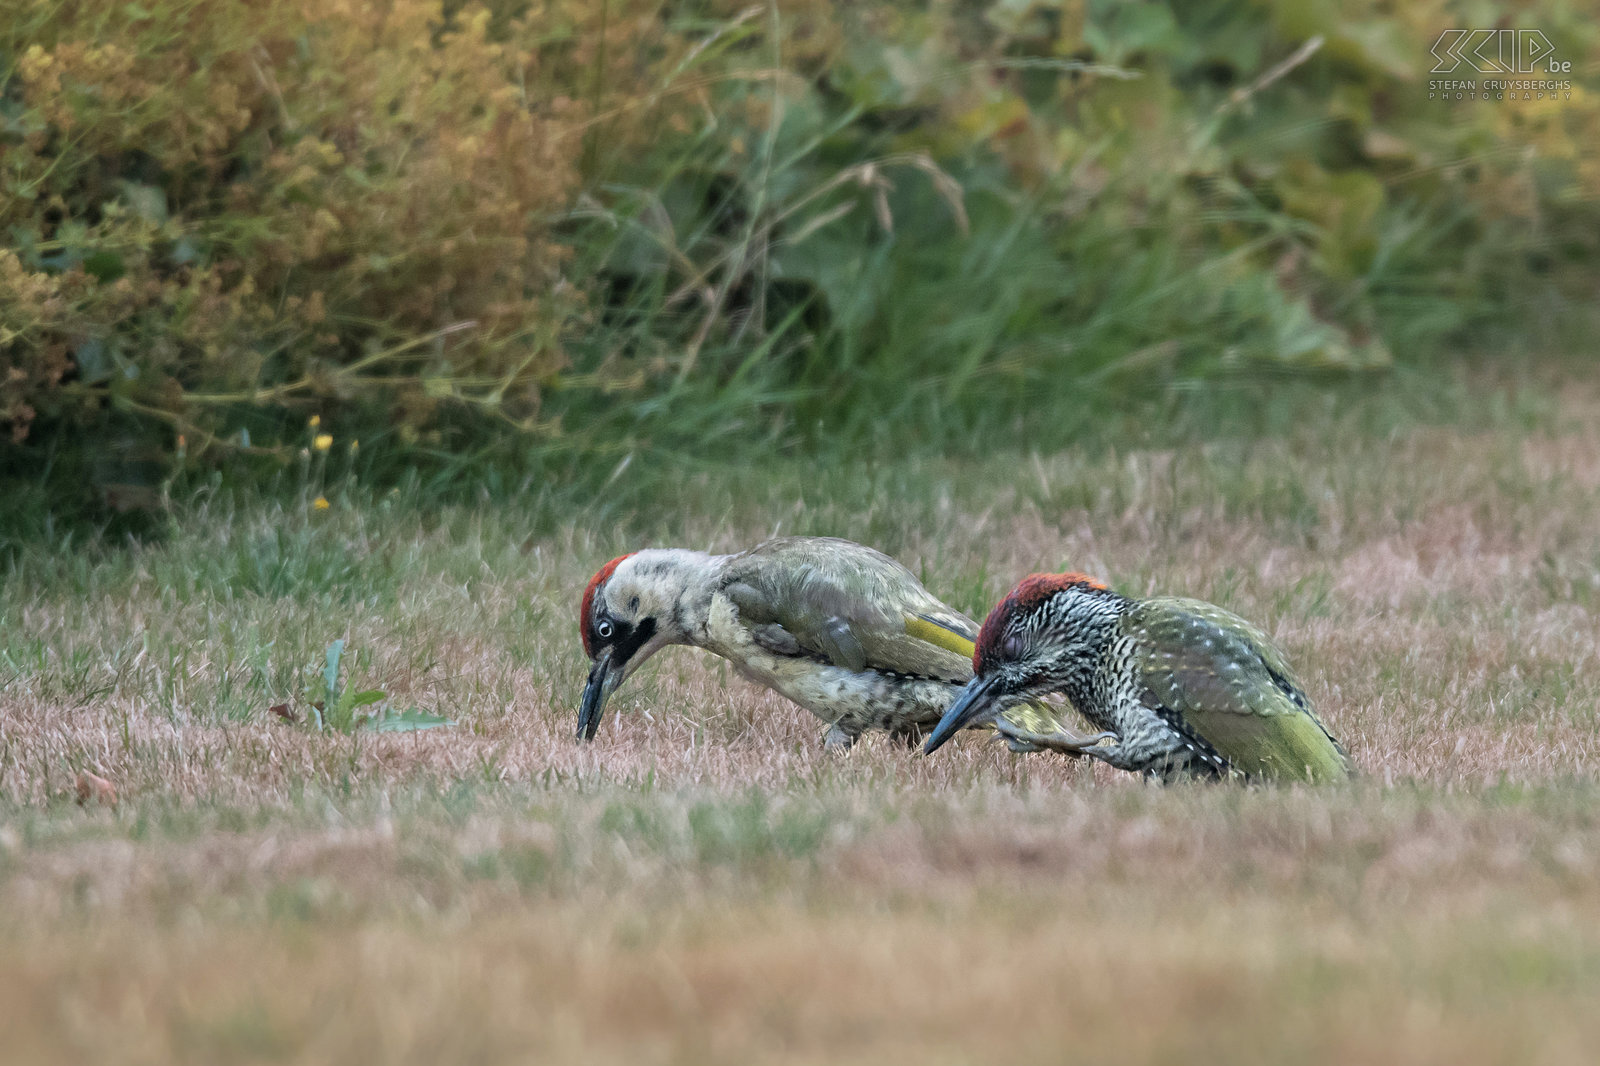 Green woodpeckers Juvenile green woodpecker and his mother (Green woodpecker, Picus viridis) looking for ants in our lawn in Scherpenheuvel (Flanders, Belgium). Juveniles have a speckled plumage and the moustachial stripe (black=female, red=male) is less visible.  Stefan Cruysberghs